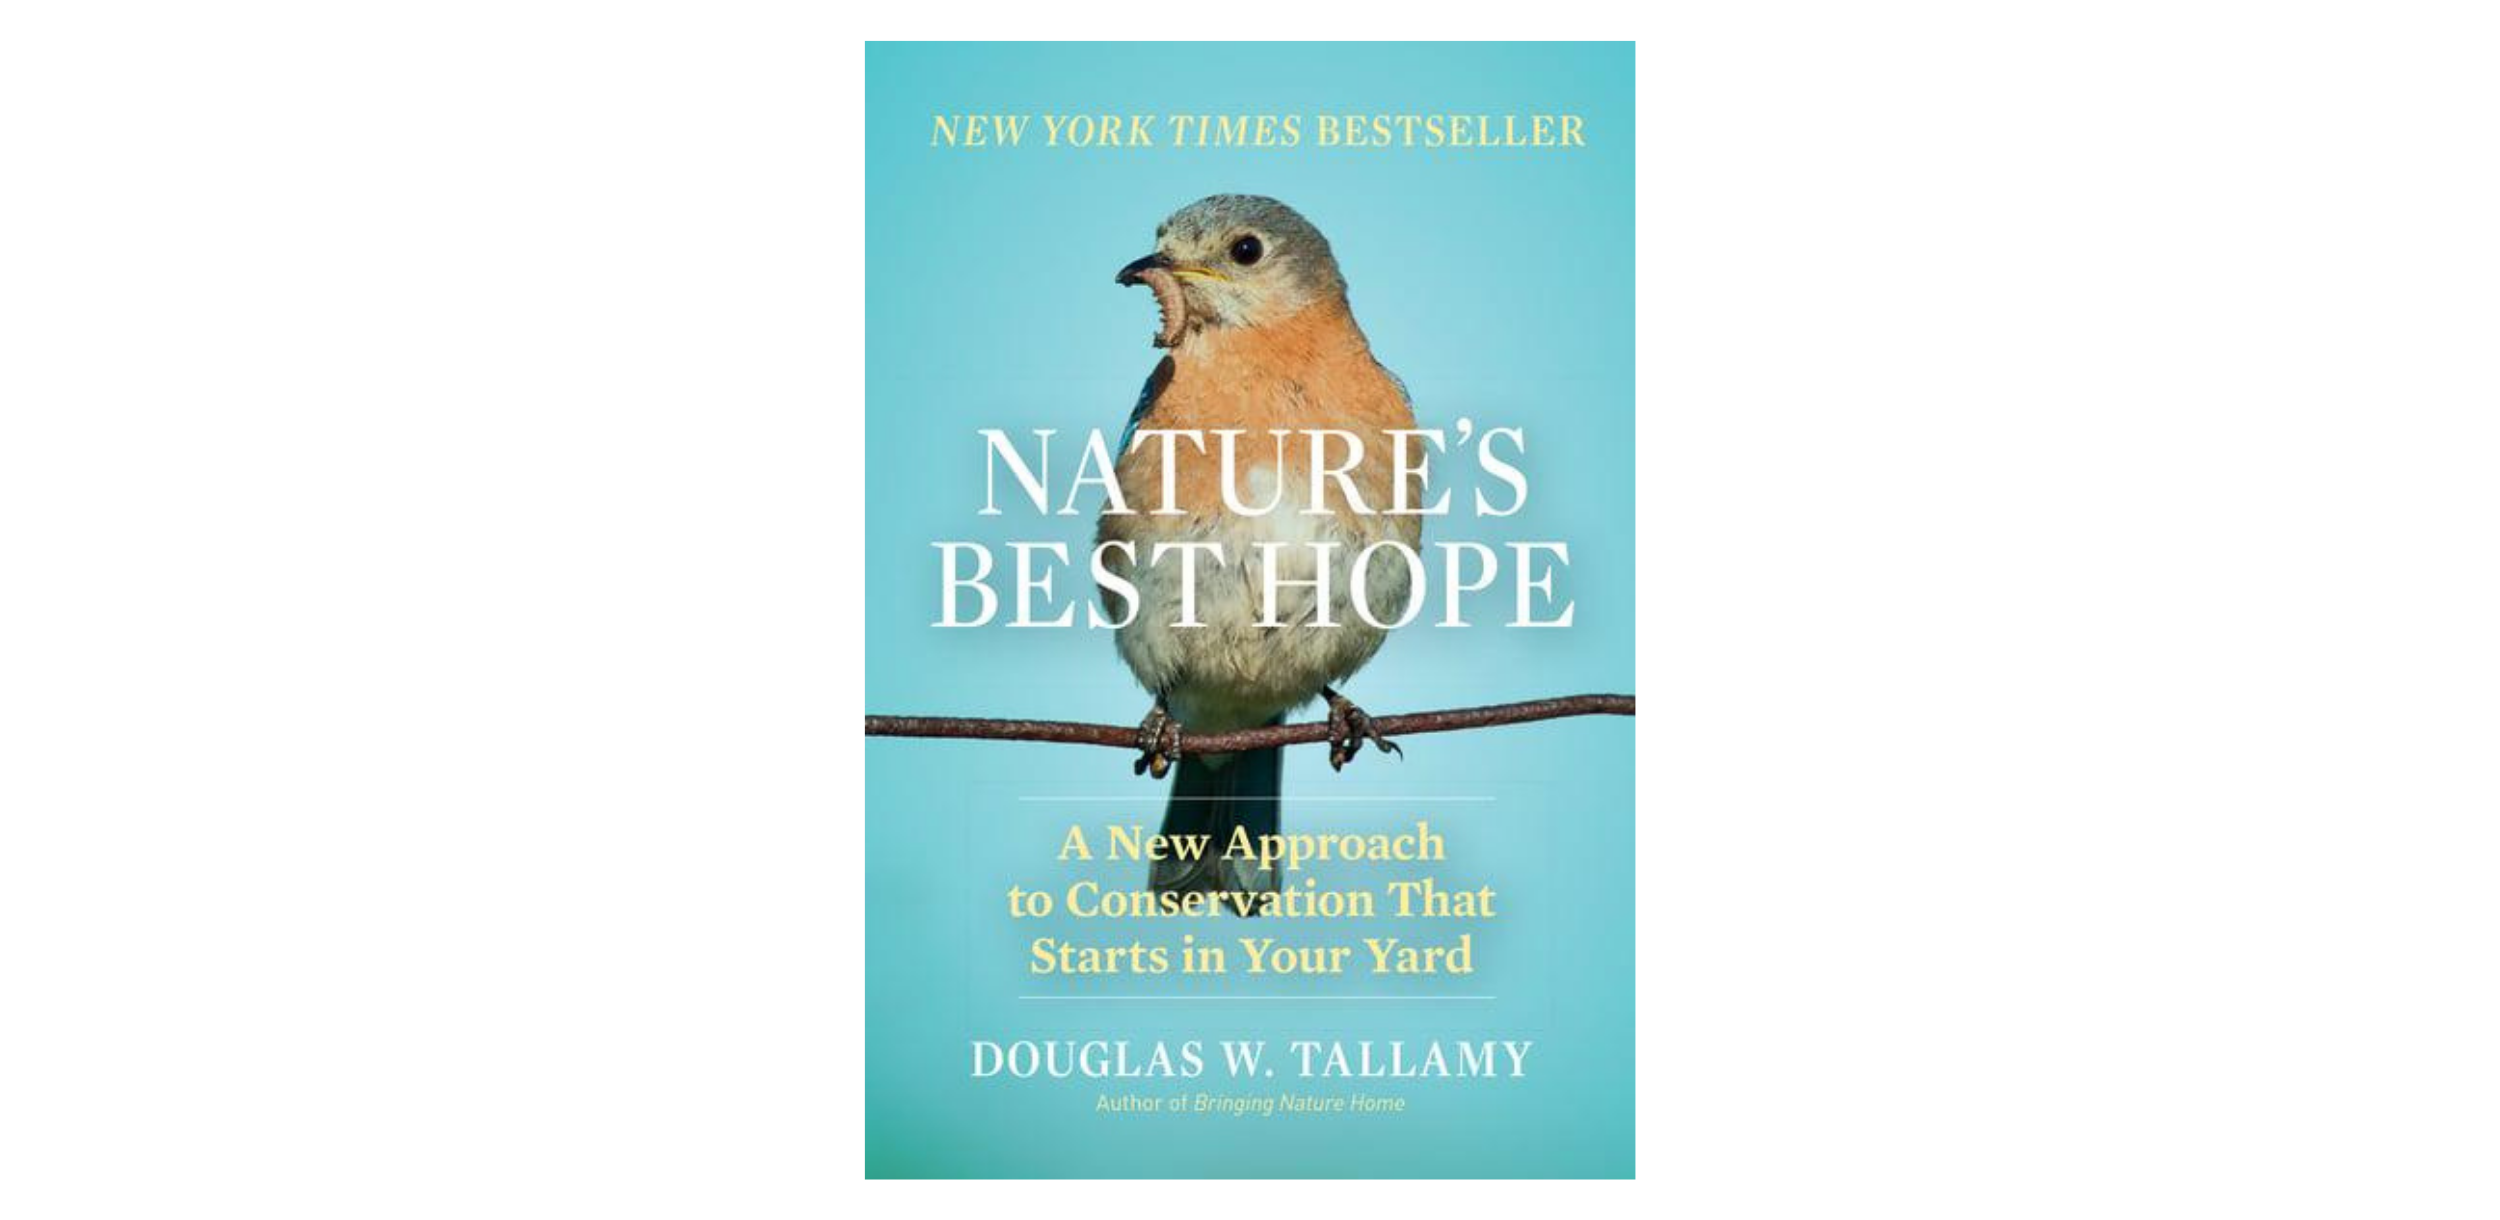 Nature's Best Hope by Douglas W. Tallamy book cover